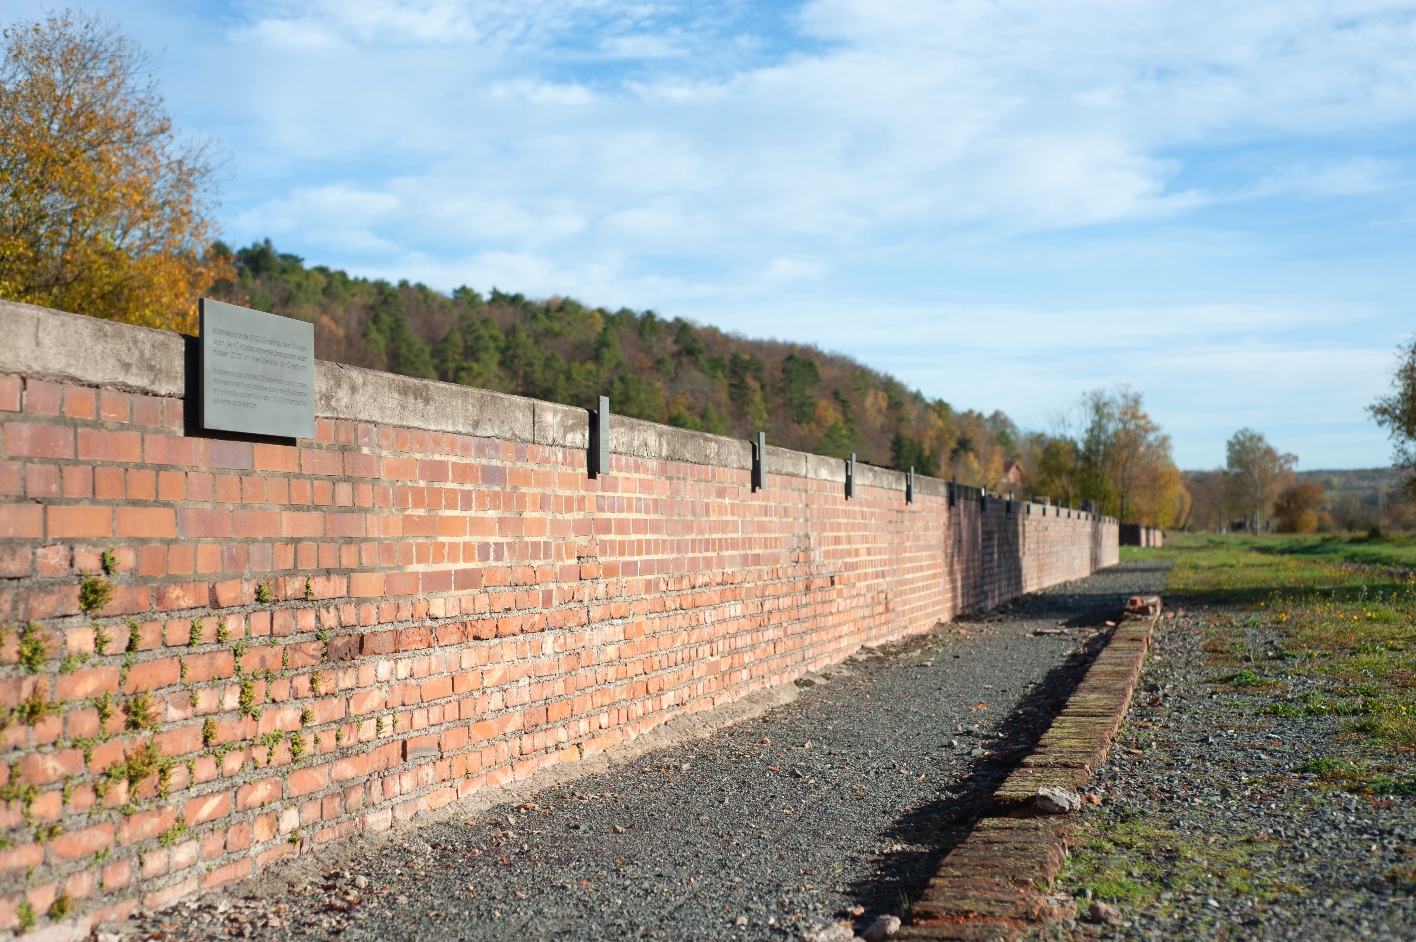 This photo shows the information and memorial site at the subcamp at the former camp station. It is a long brick foundation to which metal plaques have been attached at regular intervals.